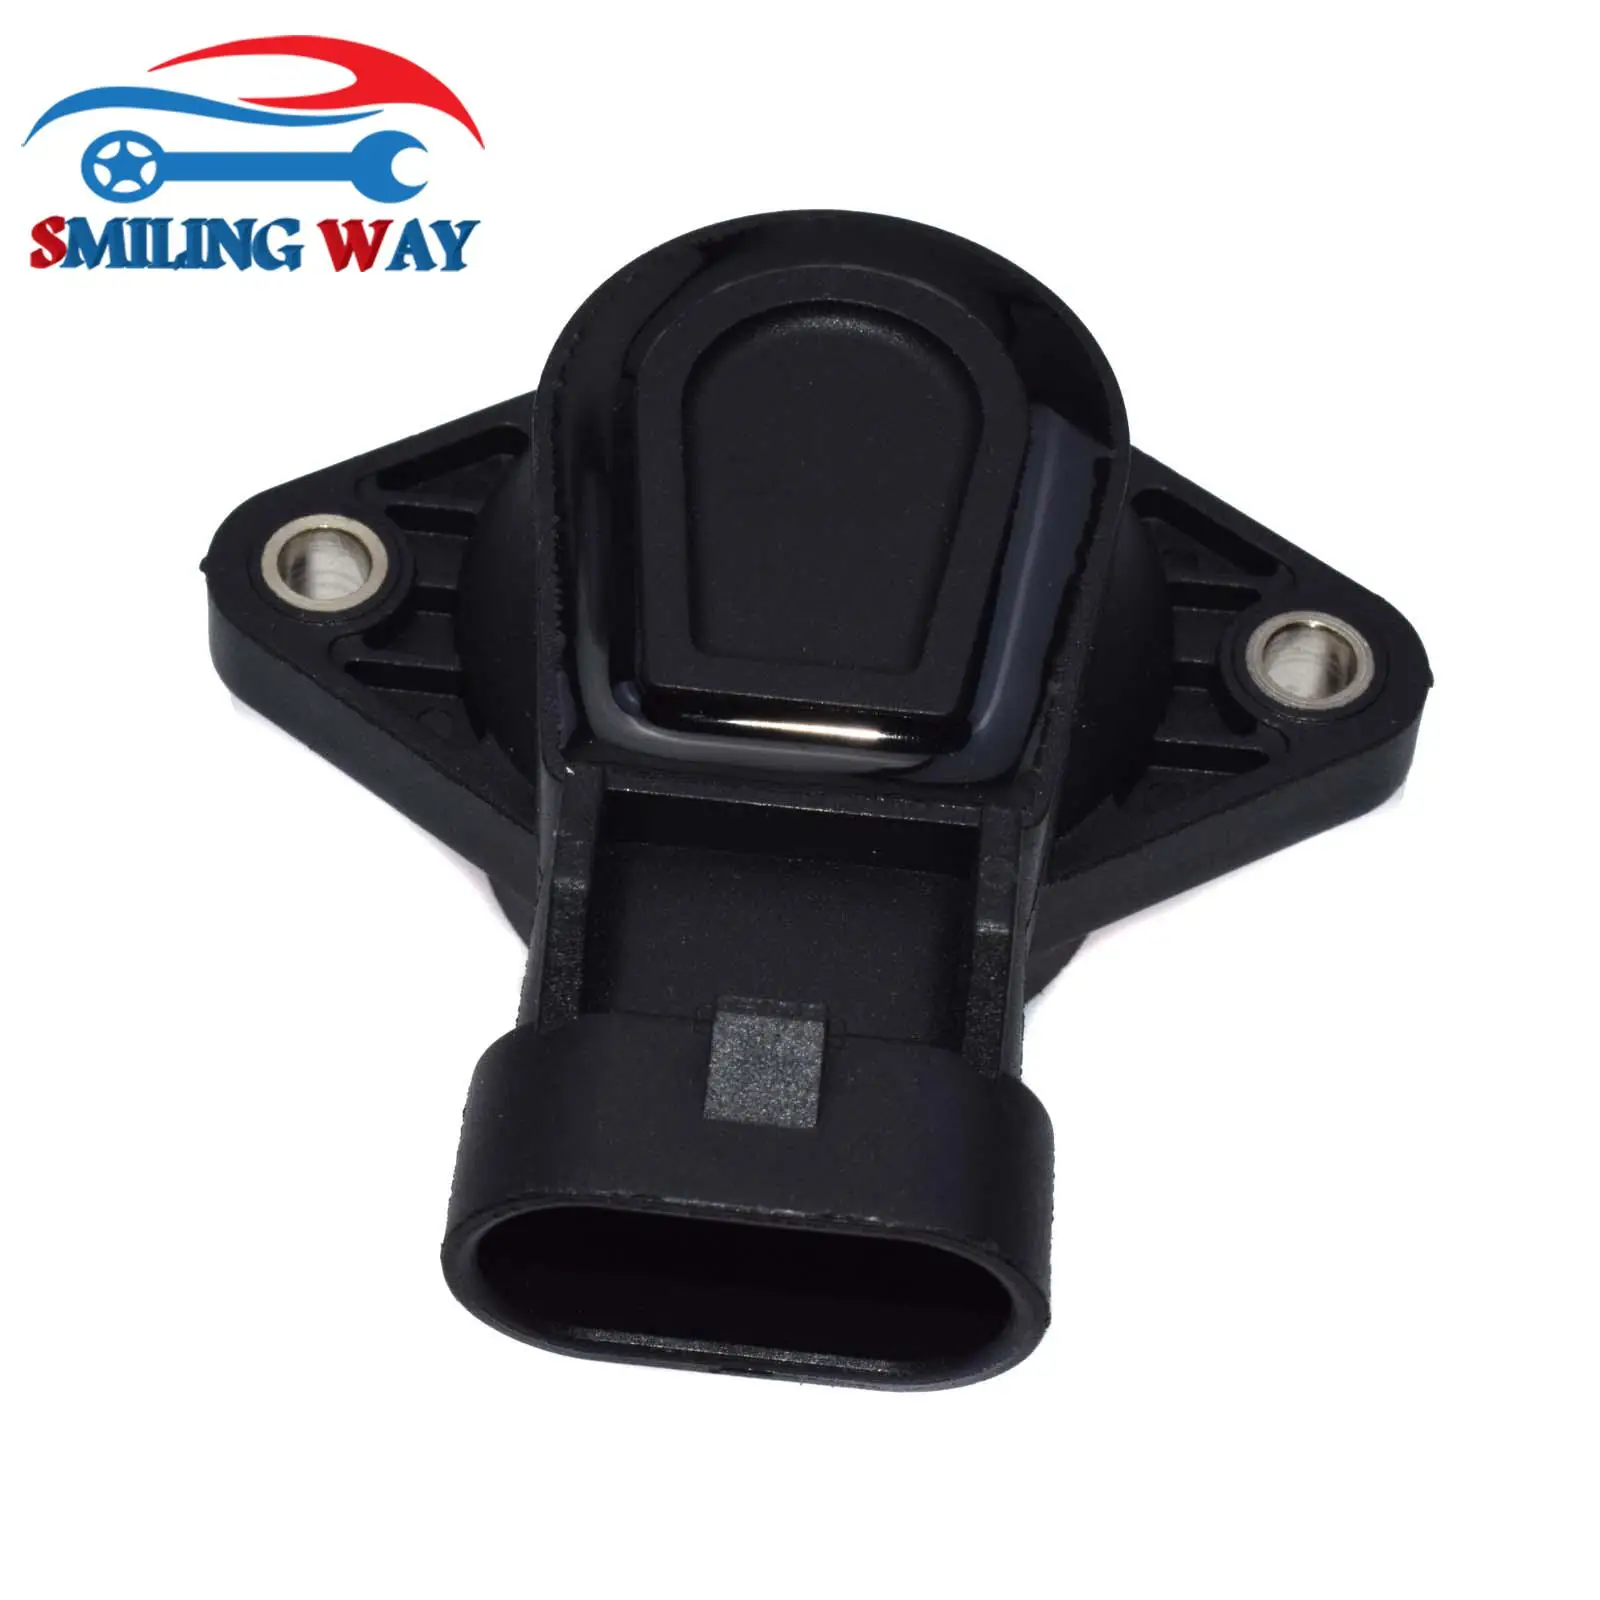 New Throttle Position Sensor for Chevy Olds Le Sabre NINETY EIGHT Camaro Impala